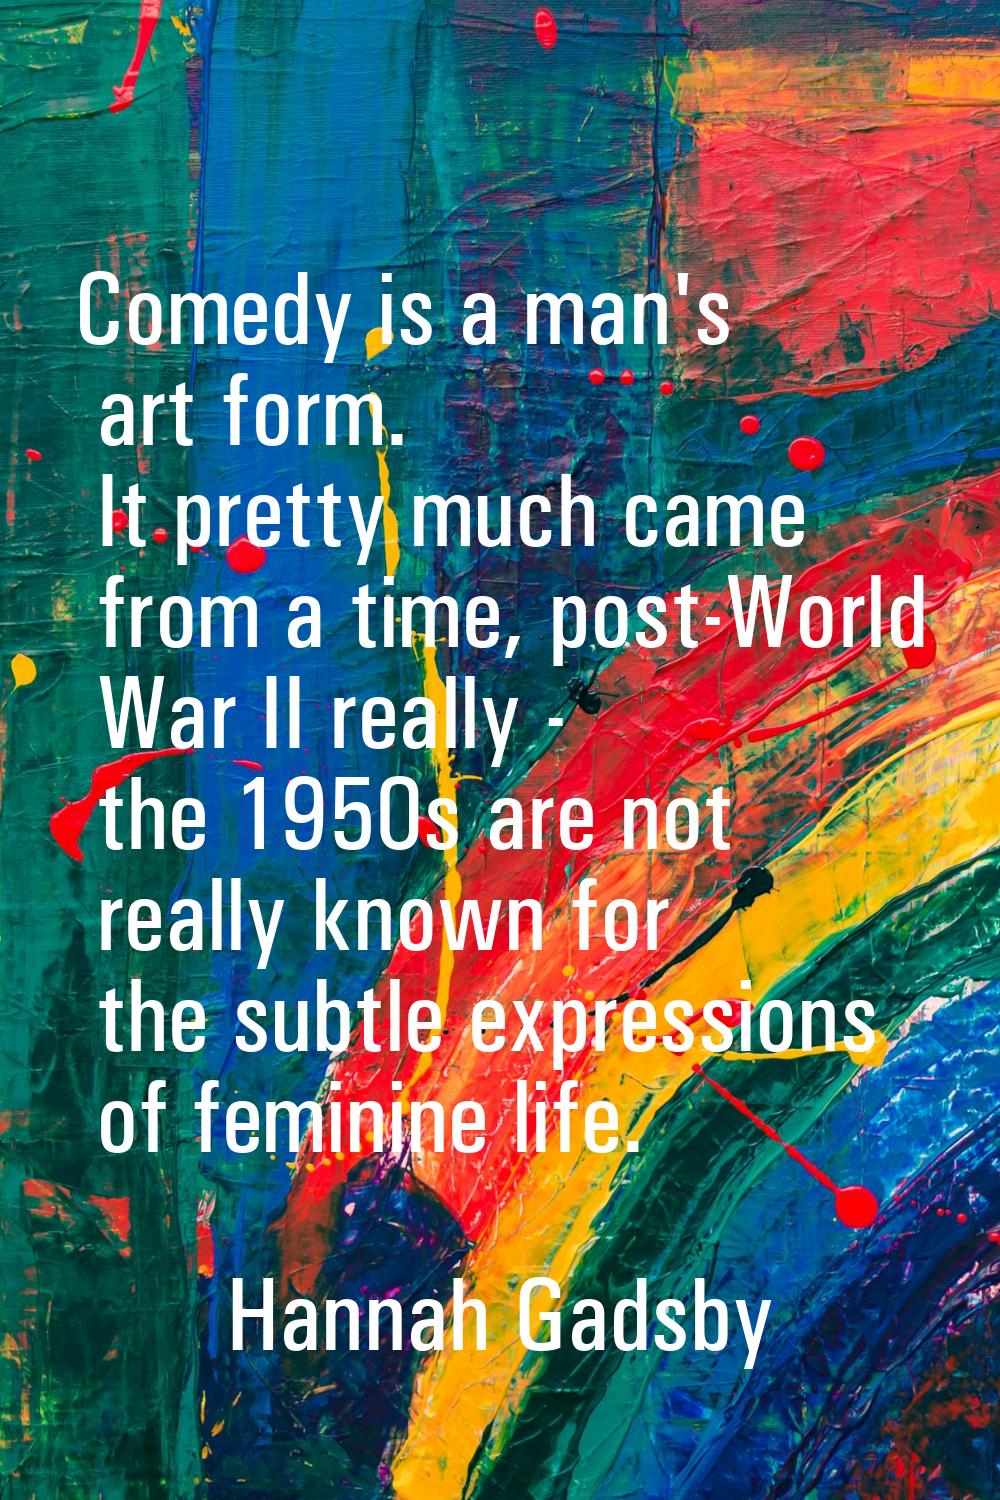 Comedy is a man's art form. It pretty much came from a time, post-World War II really - the 1950s a